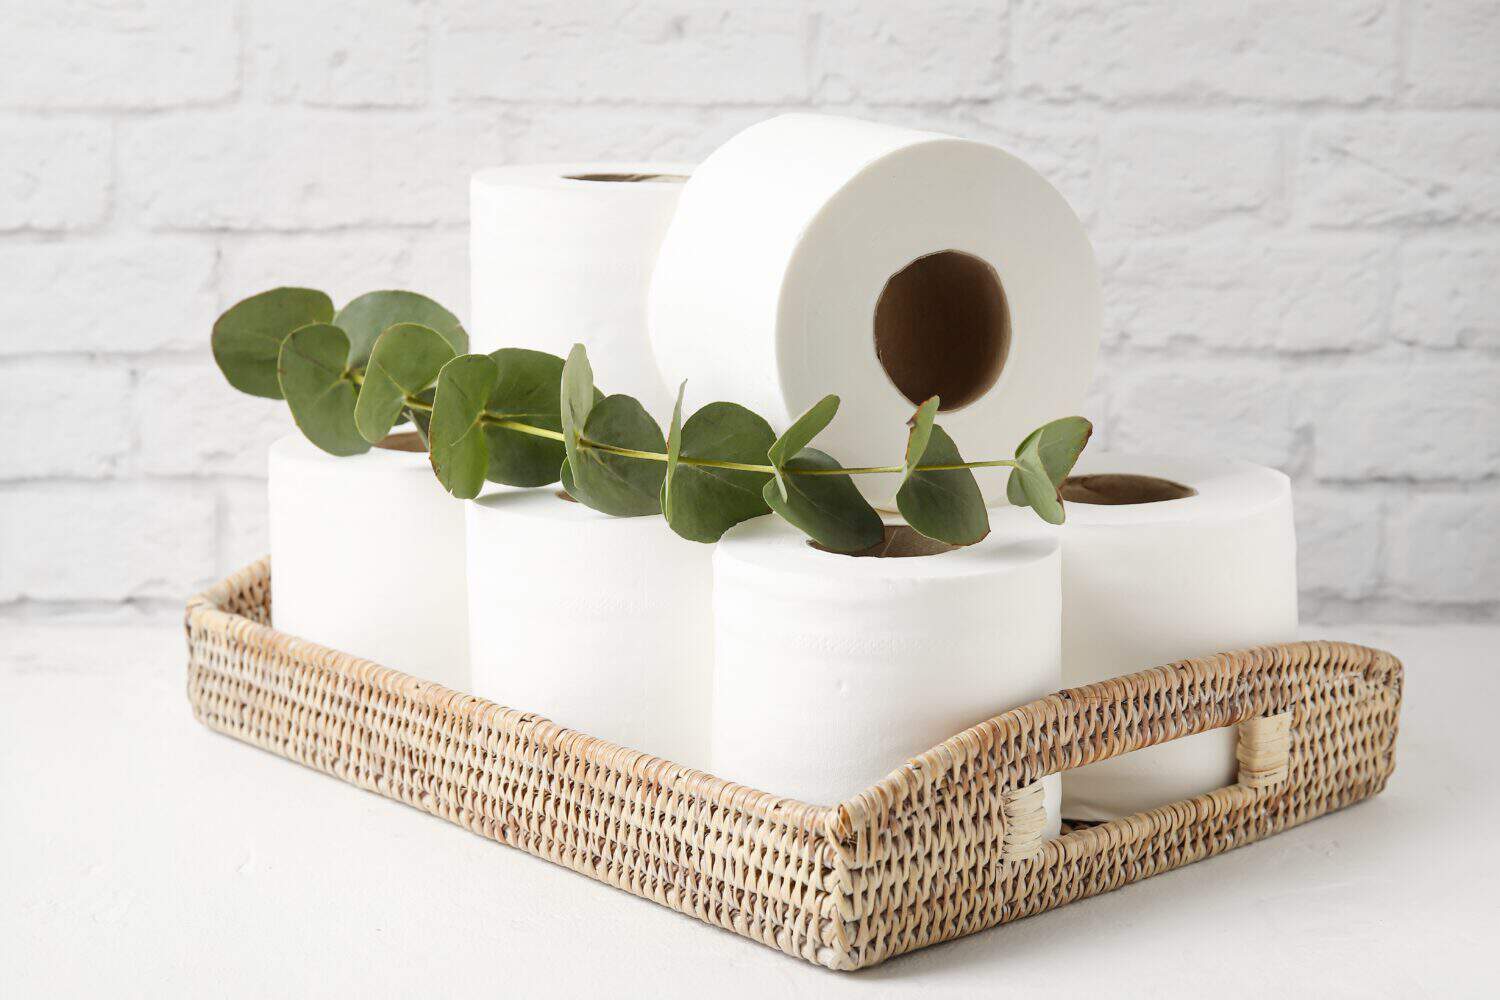 Basket with rolls of toilet paper and eucalyptus on table near brick wall